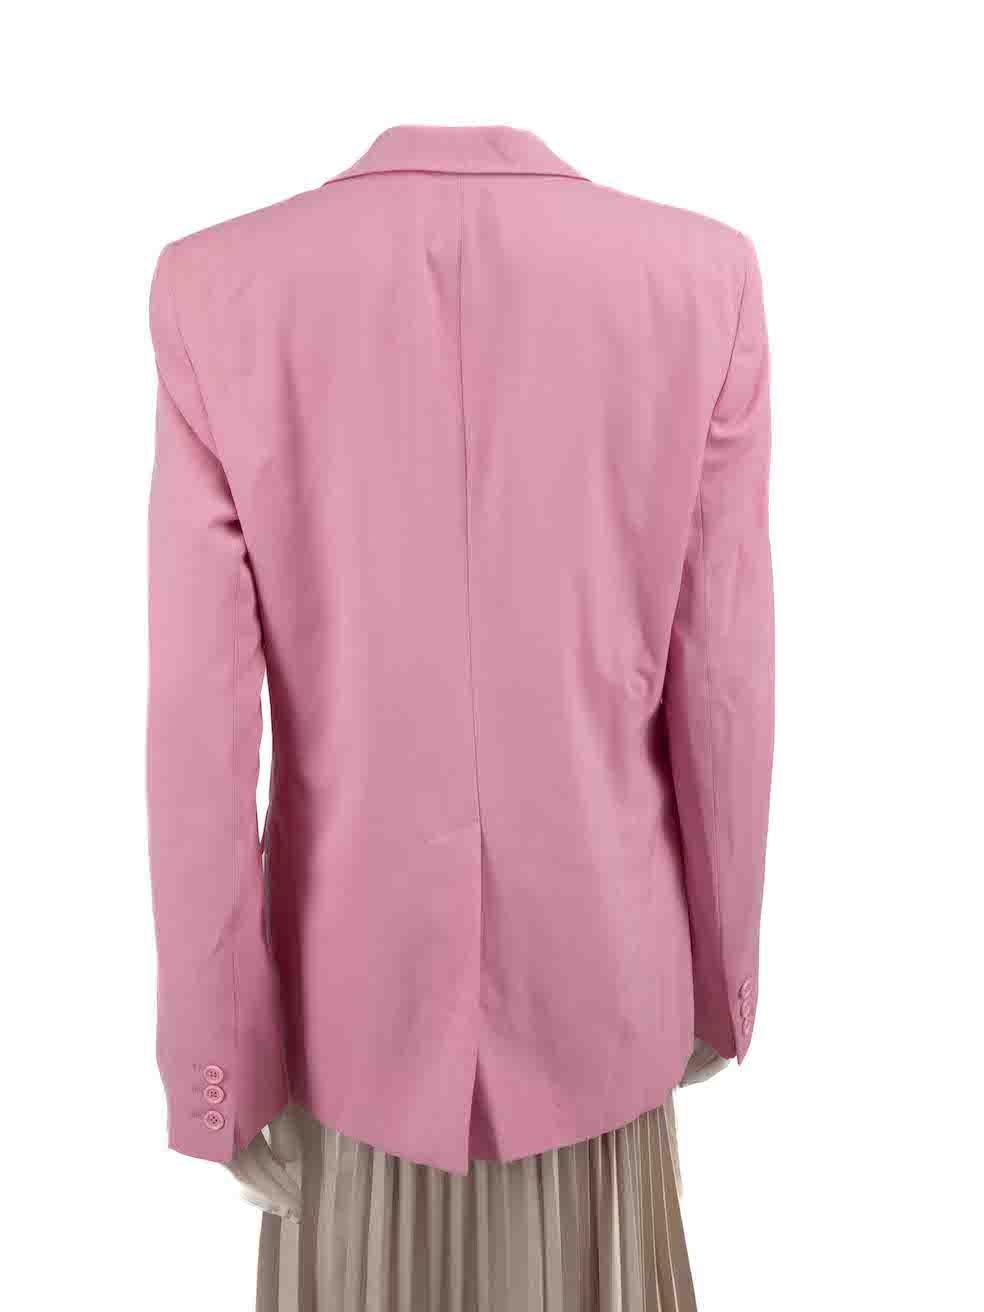 Stella McCartney Pink Wool Single Breasted Blazer Size L In New Condition For Sale In London, GB